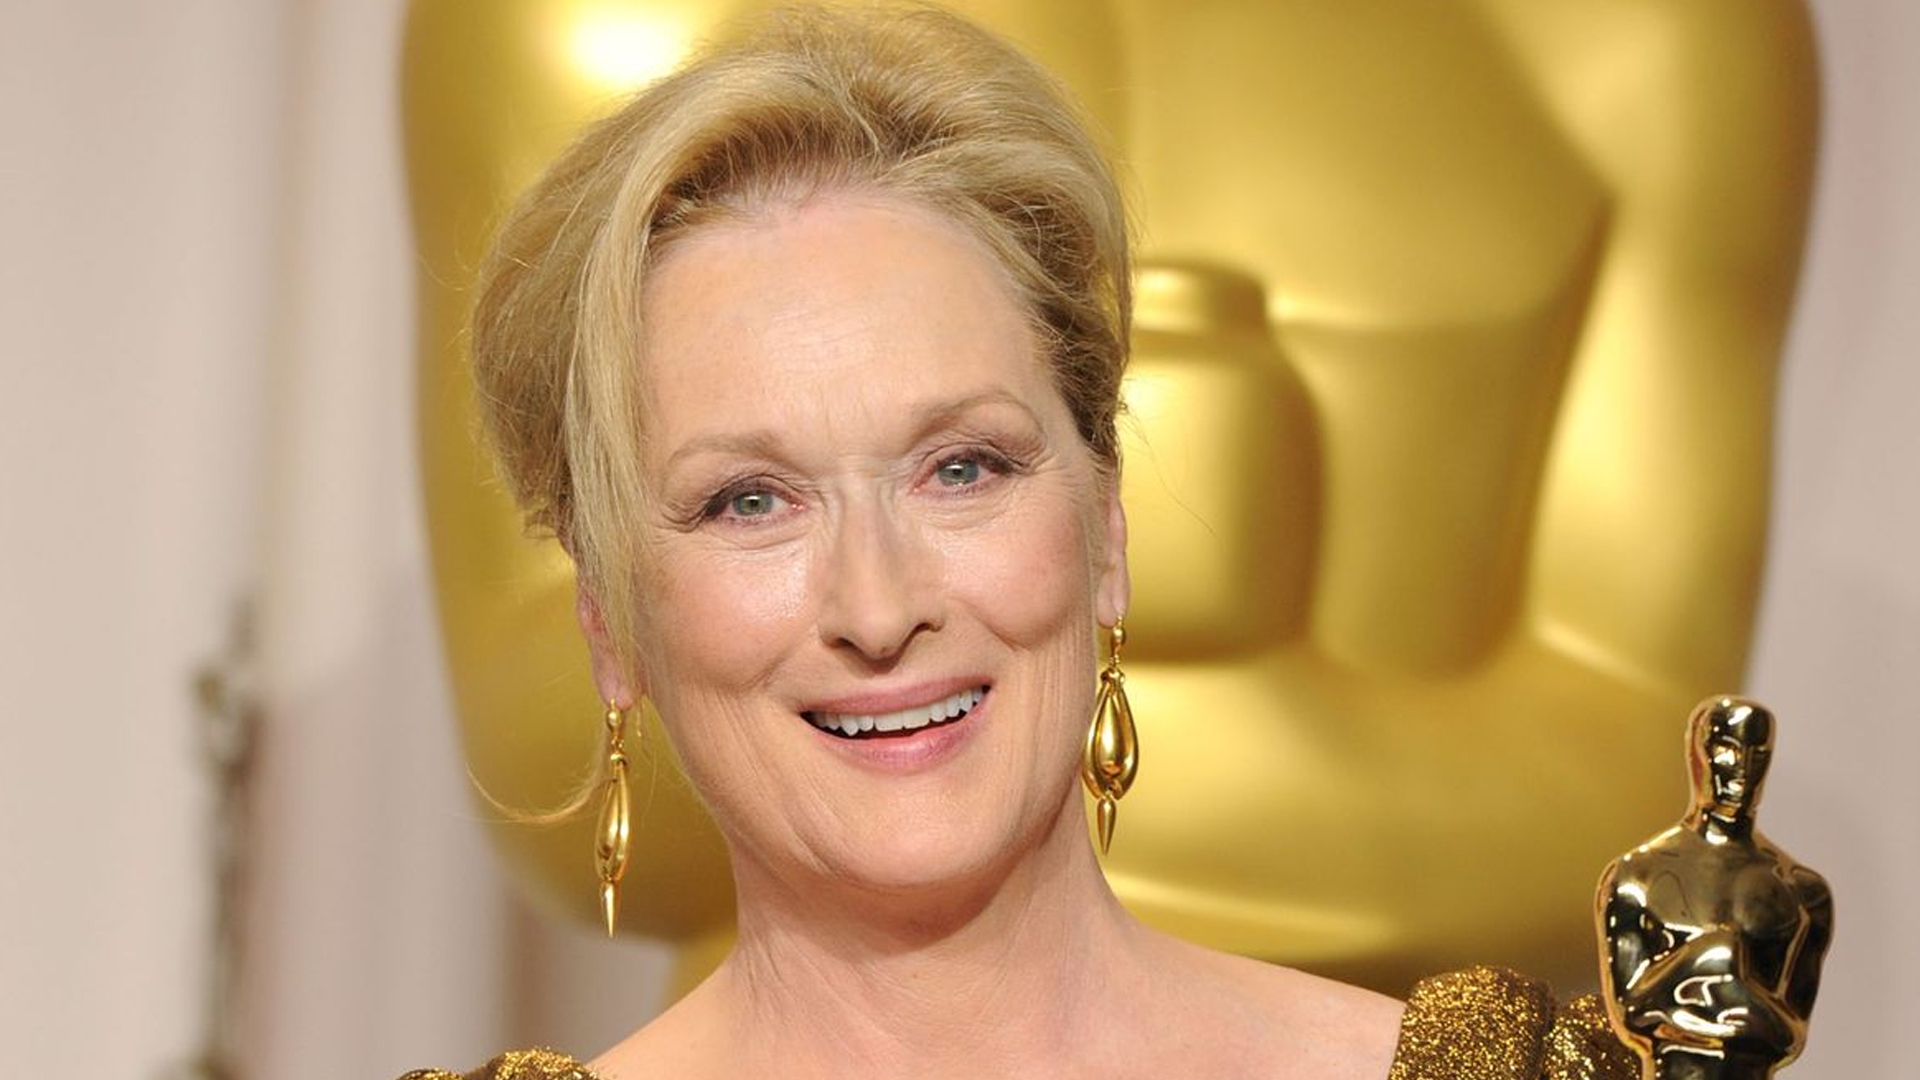 How Many Siblings Does Meryl Streep Have?